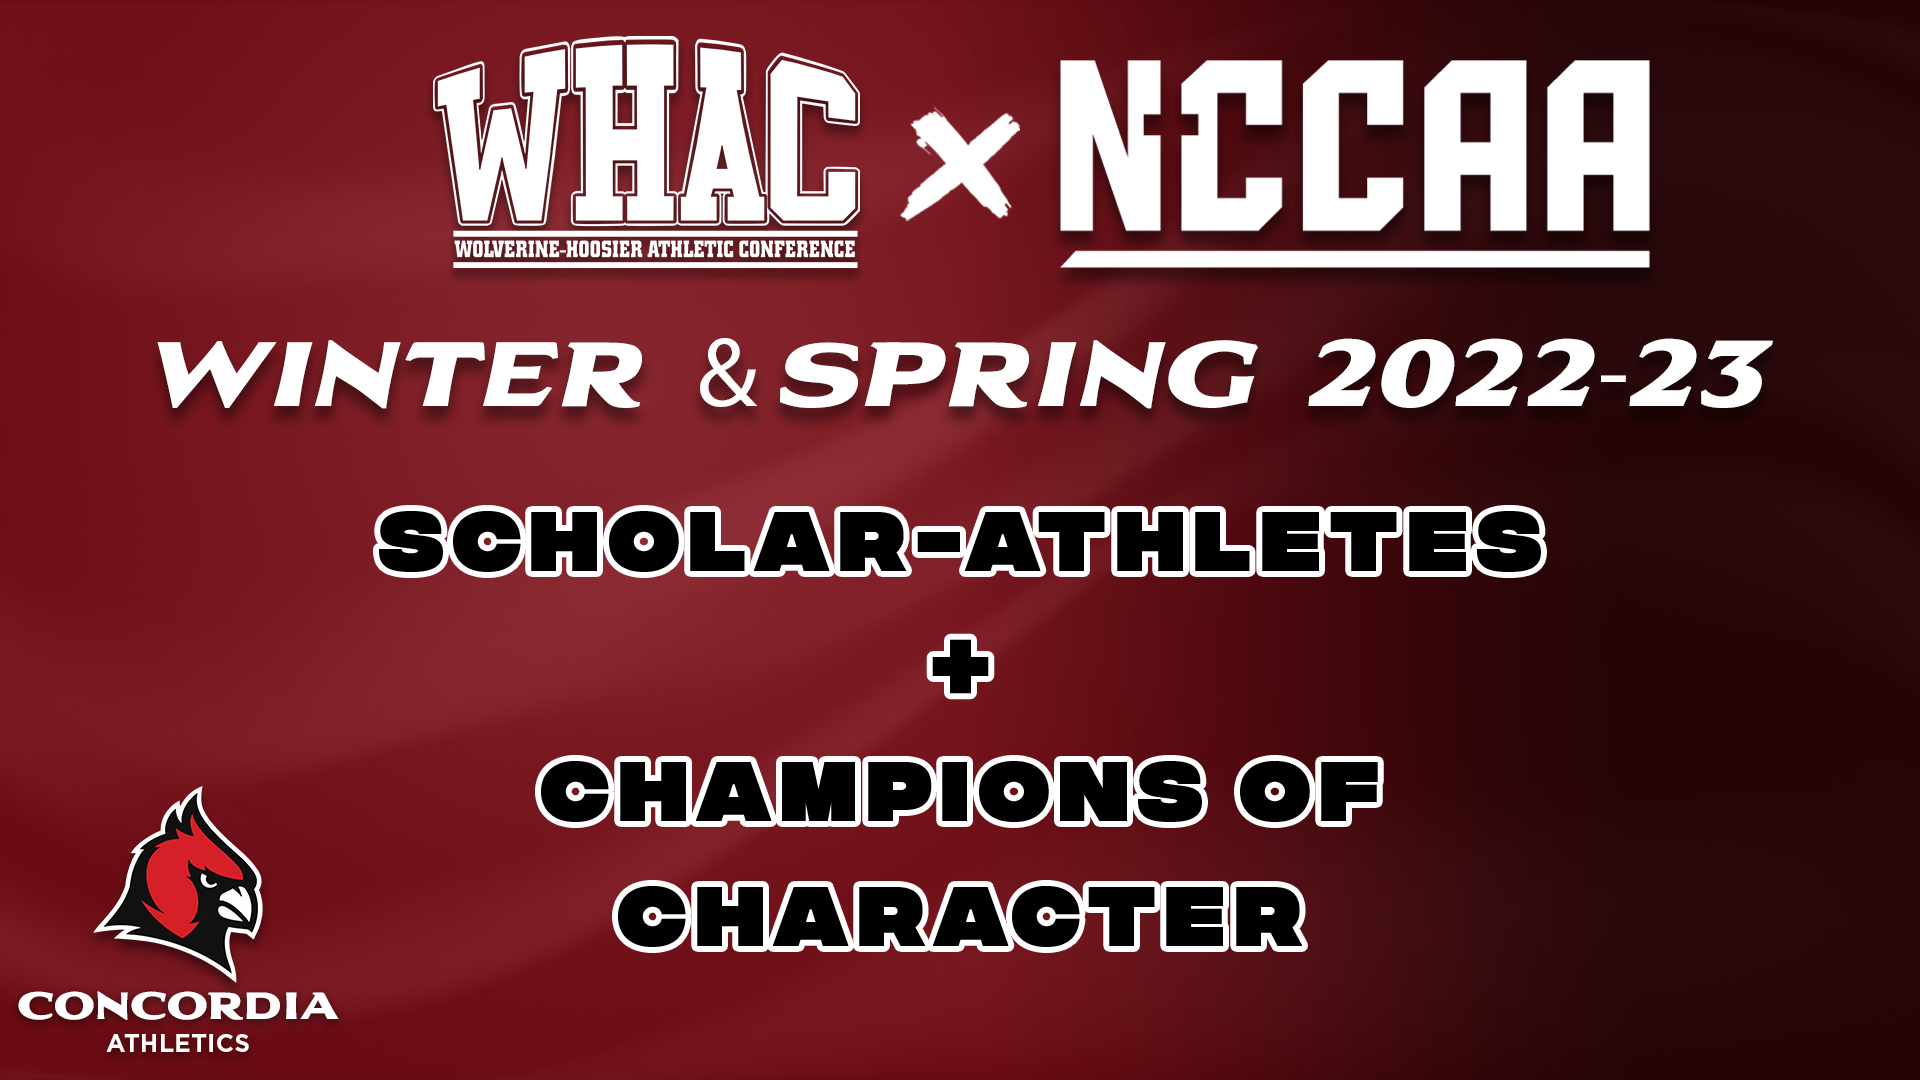 Winter and Spring Champions of Character and Scholar-Athletes Announced